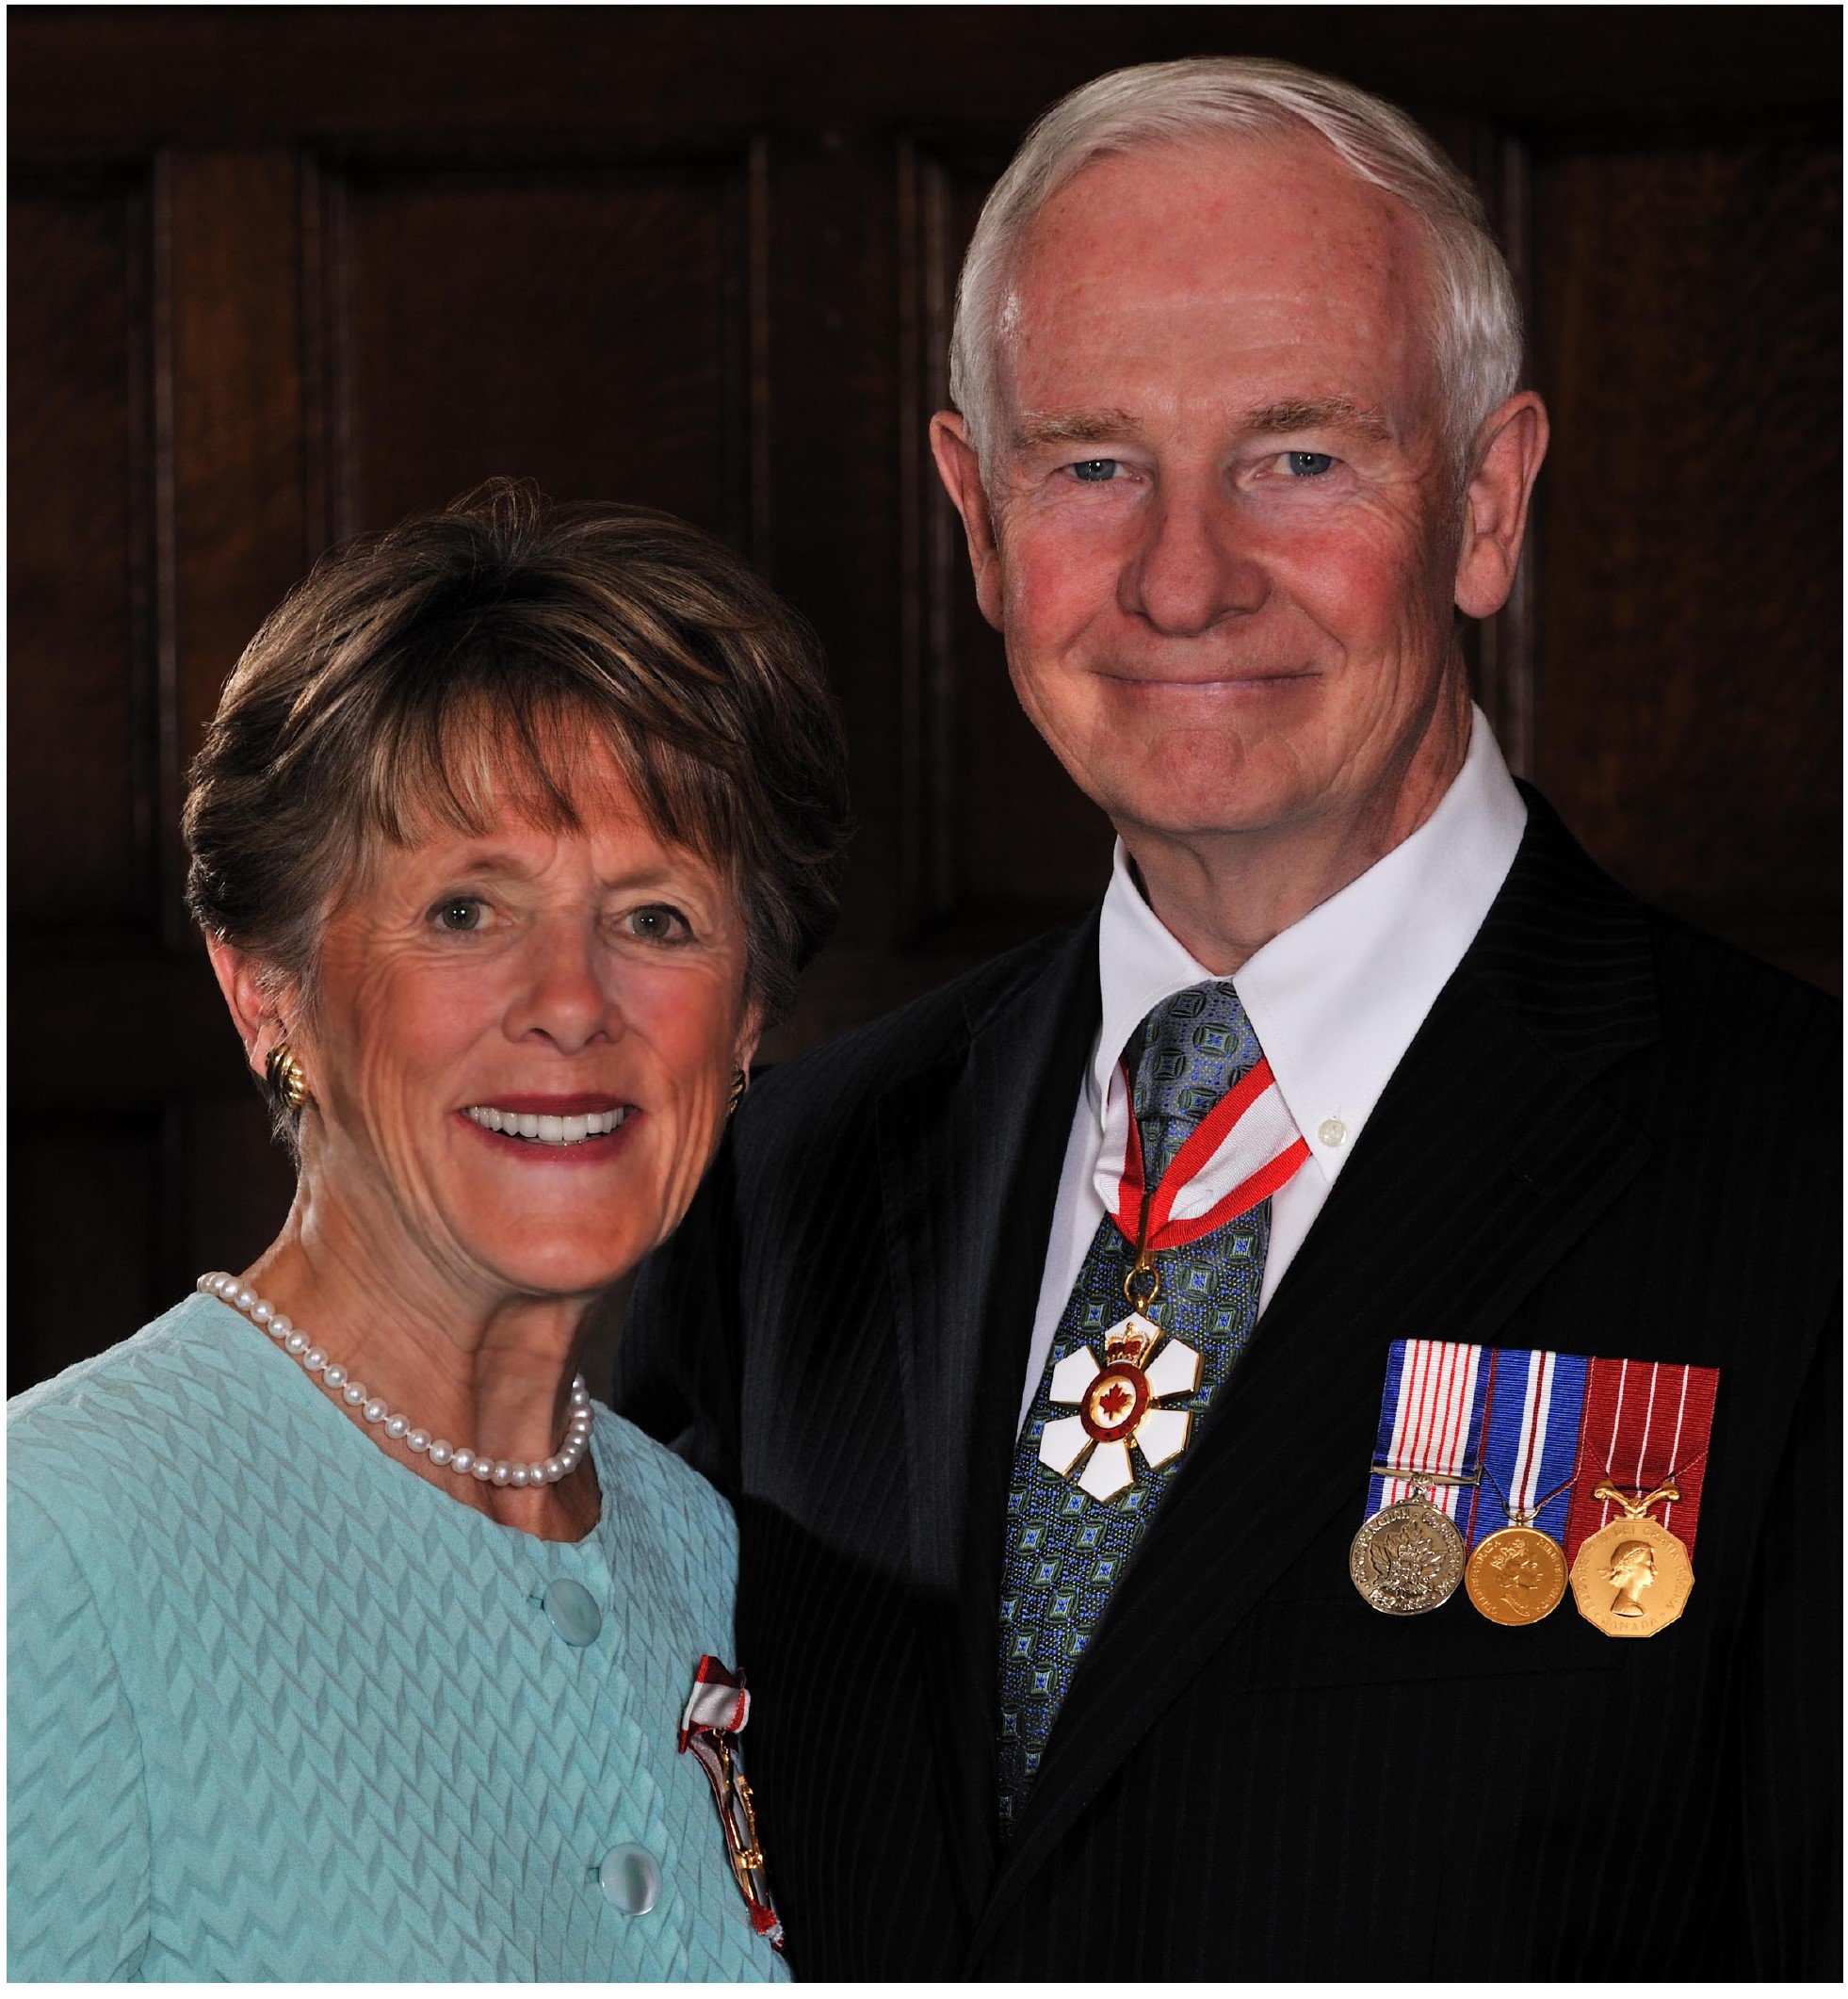 Farewell Reception For Governor General David Johnston Hosted by Speakers of the Senate and House of Commons